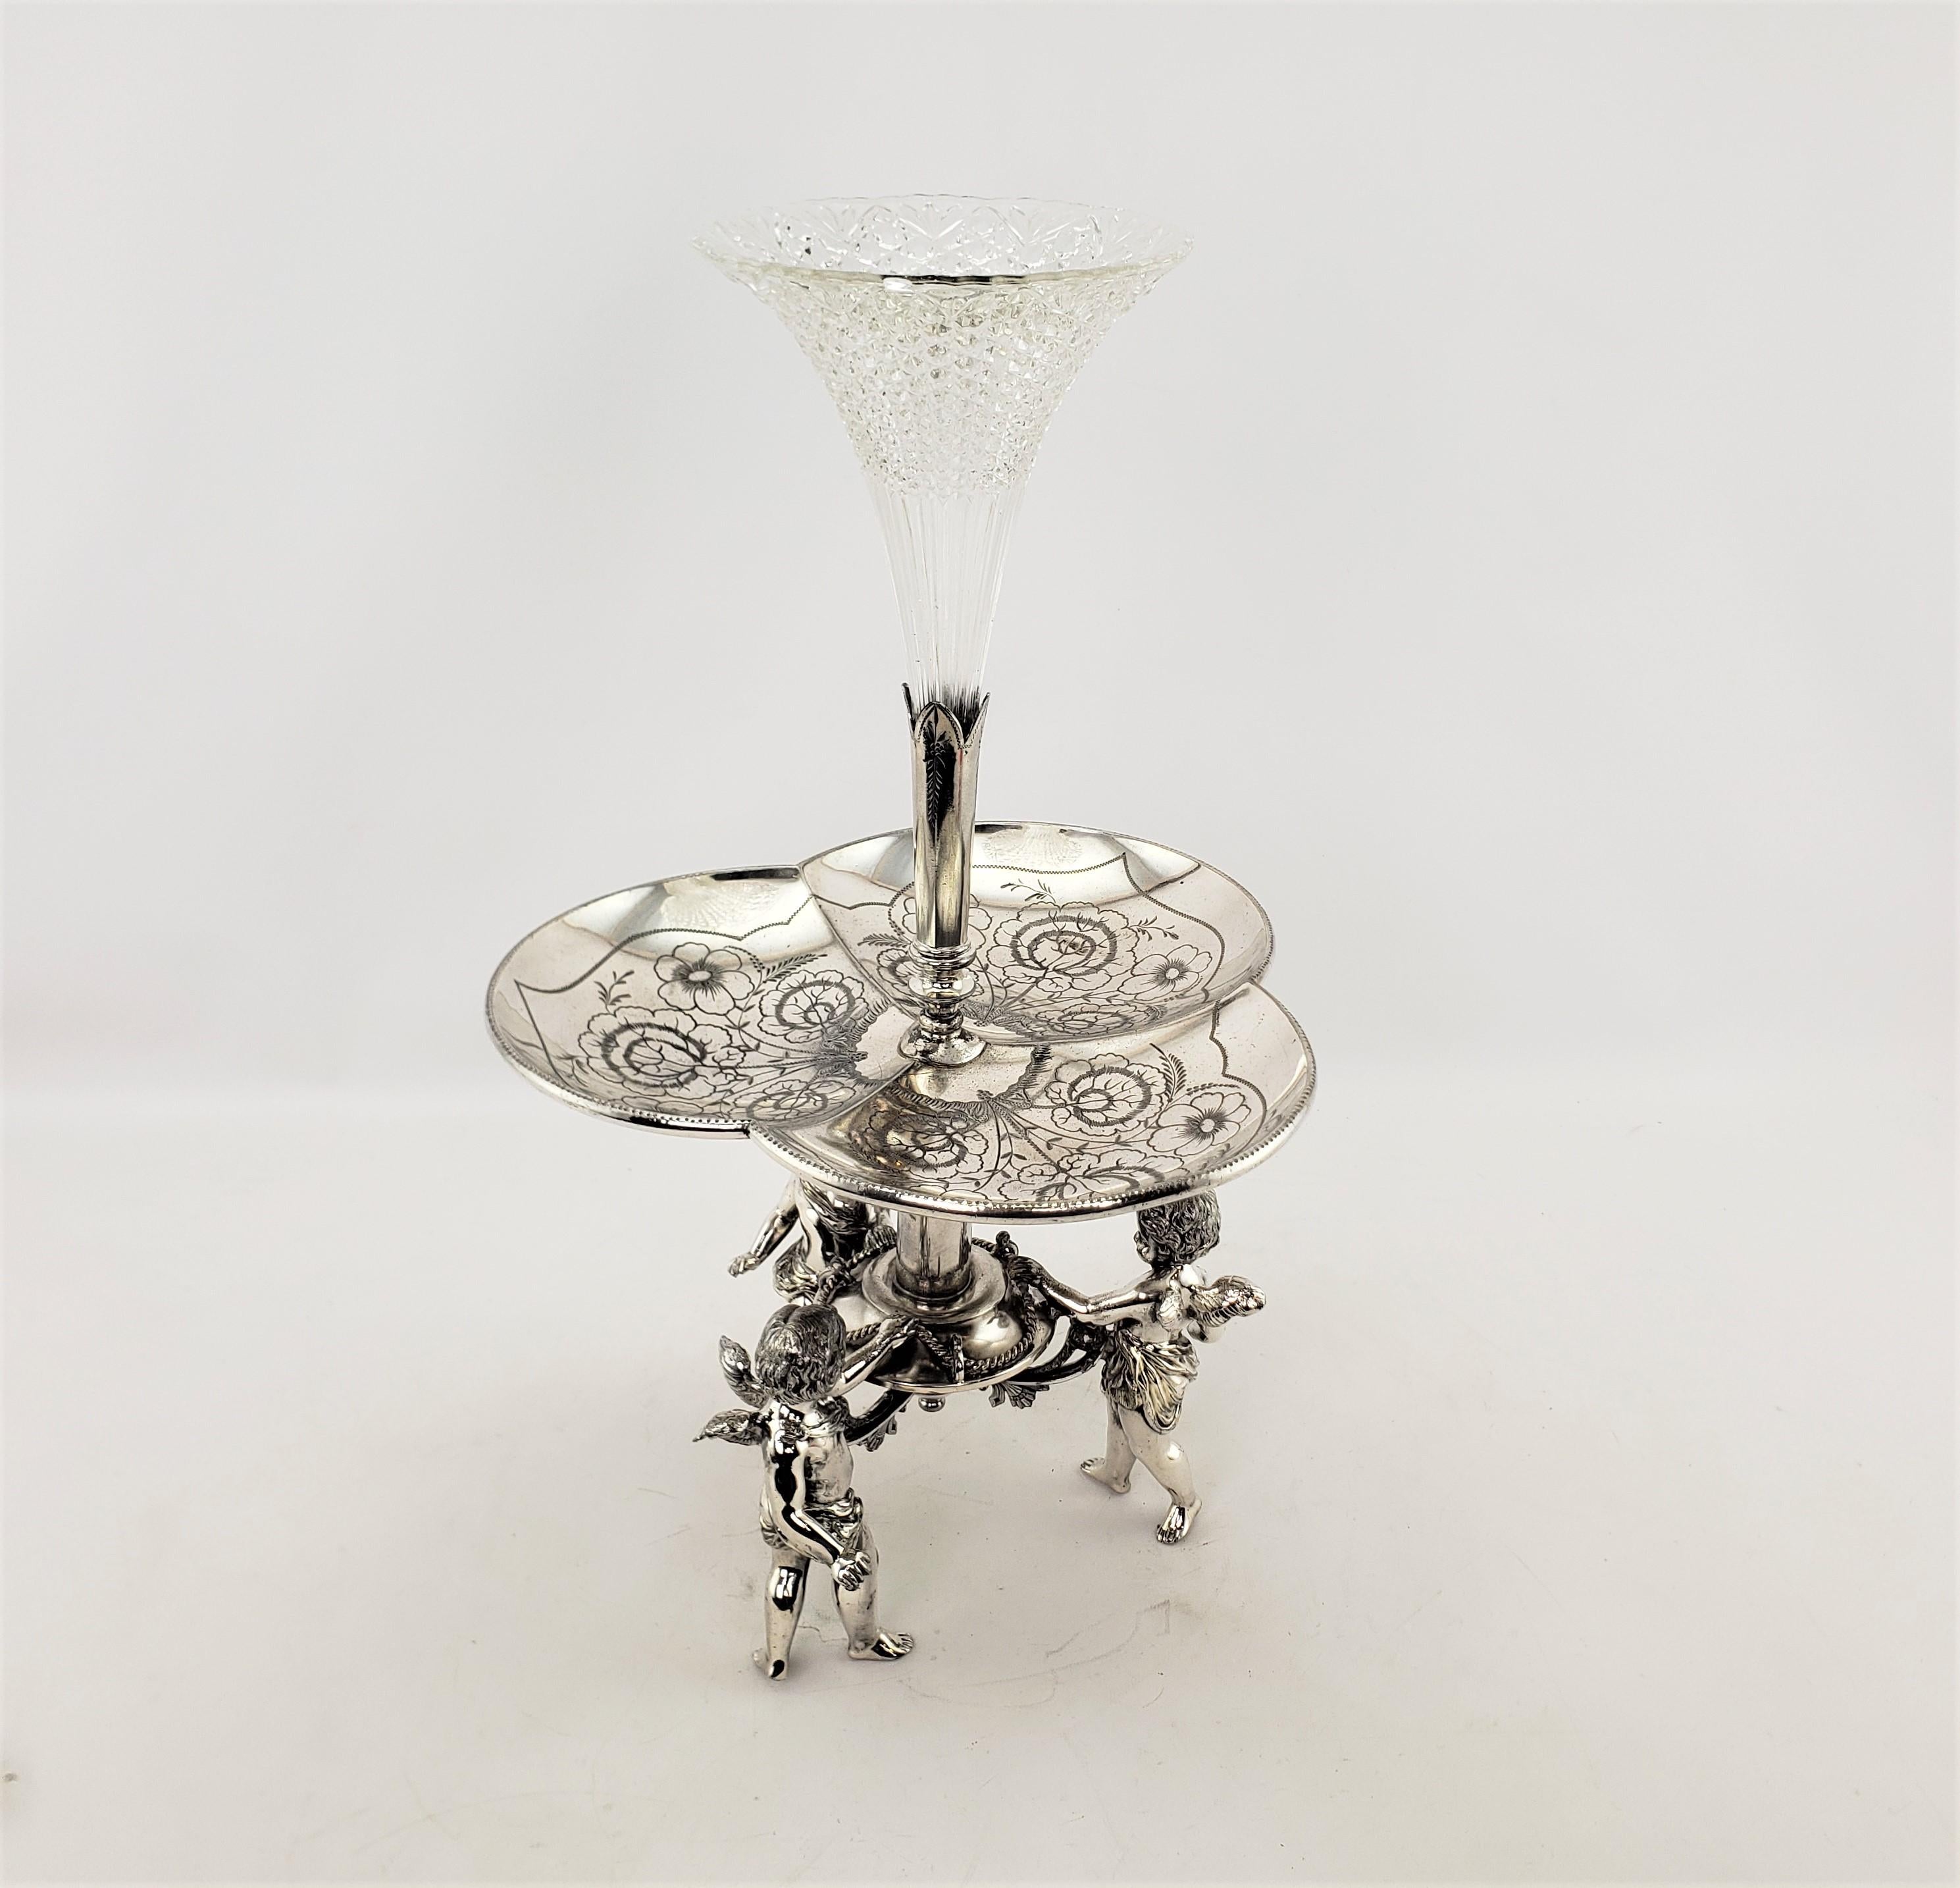 epergne silver plate centerpiece